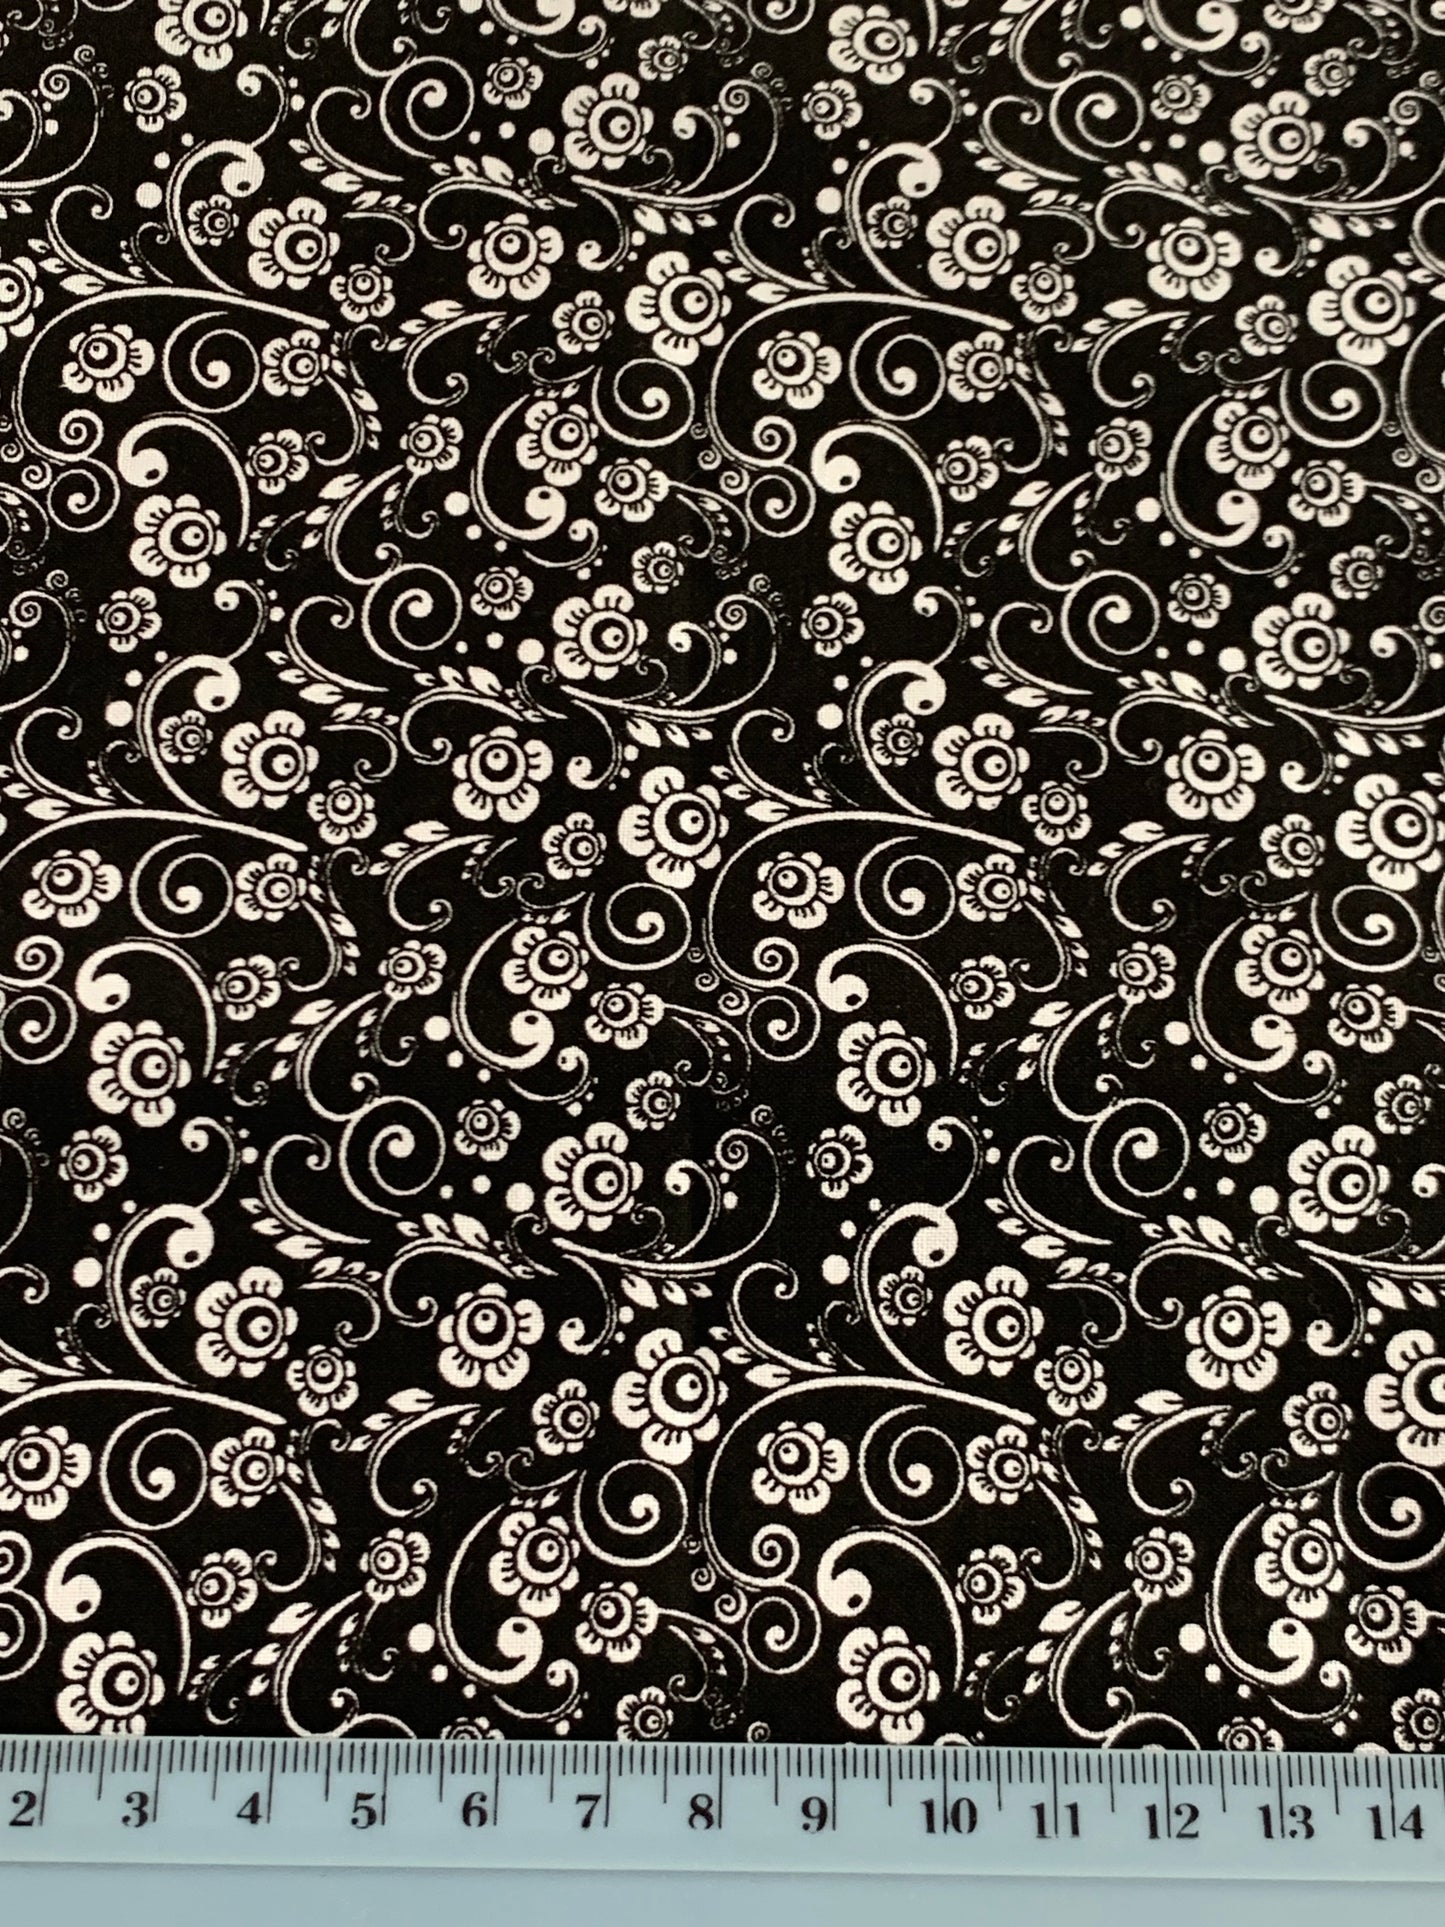 Black and white floral Remnant